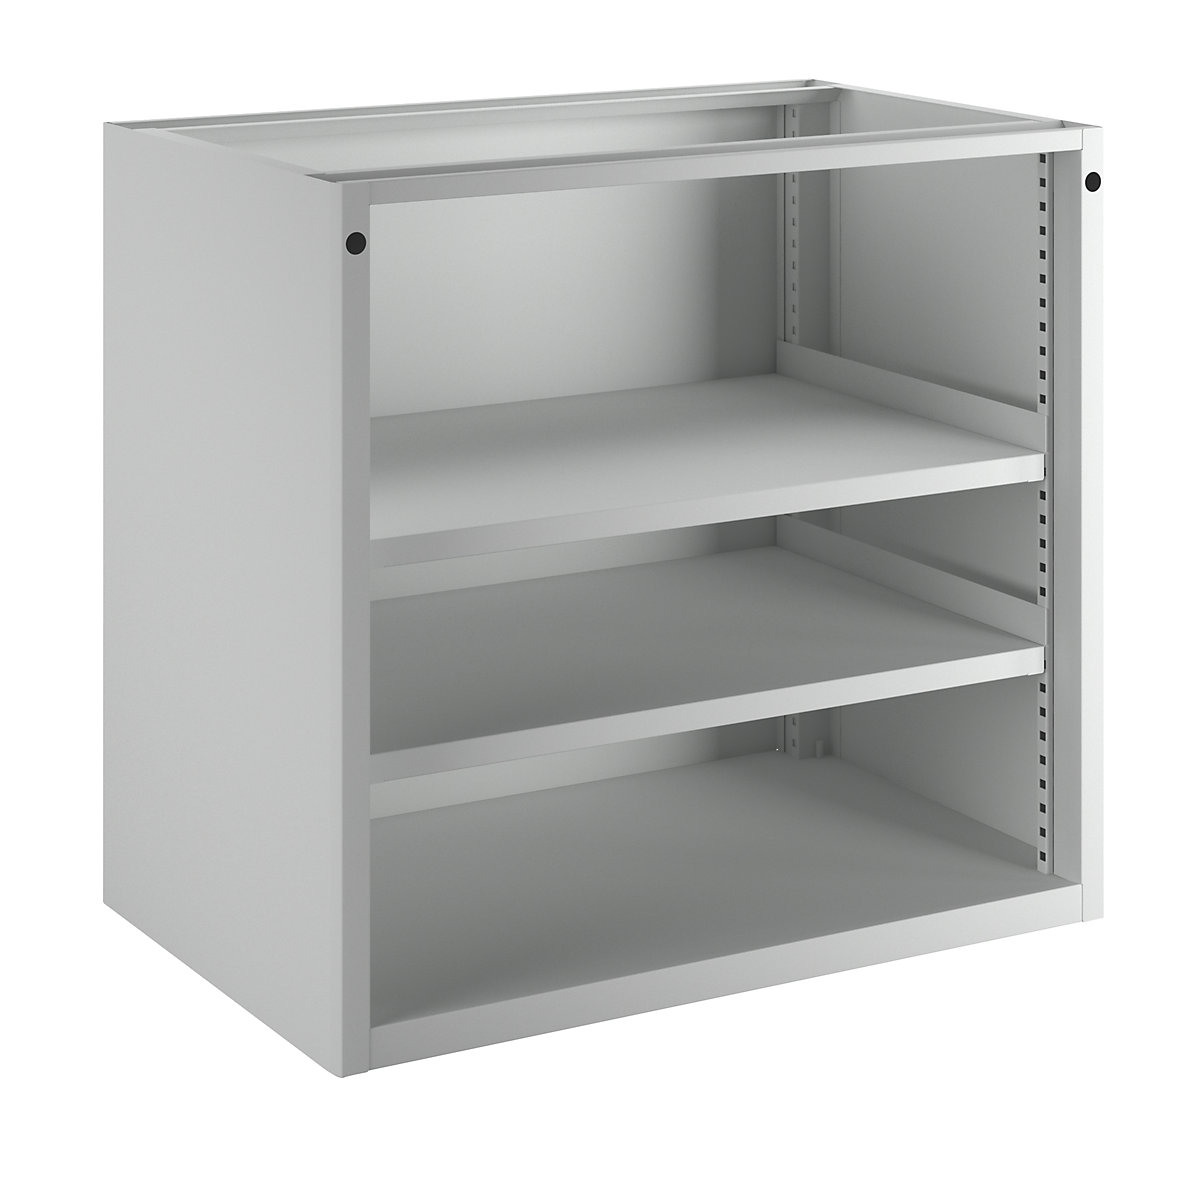 Cabinet for material and tool dispensing counter – ANKE